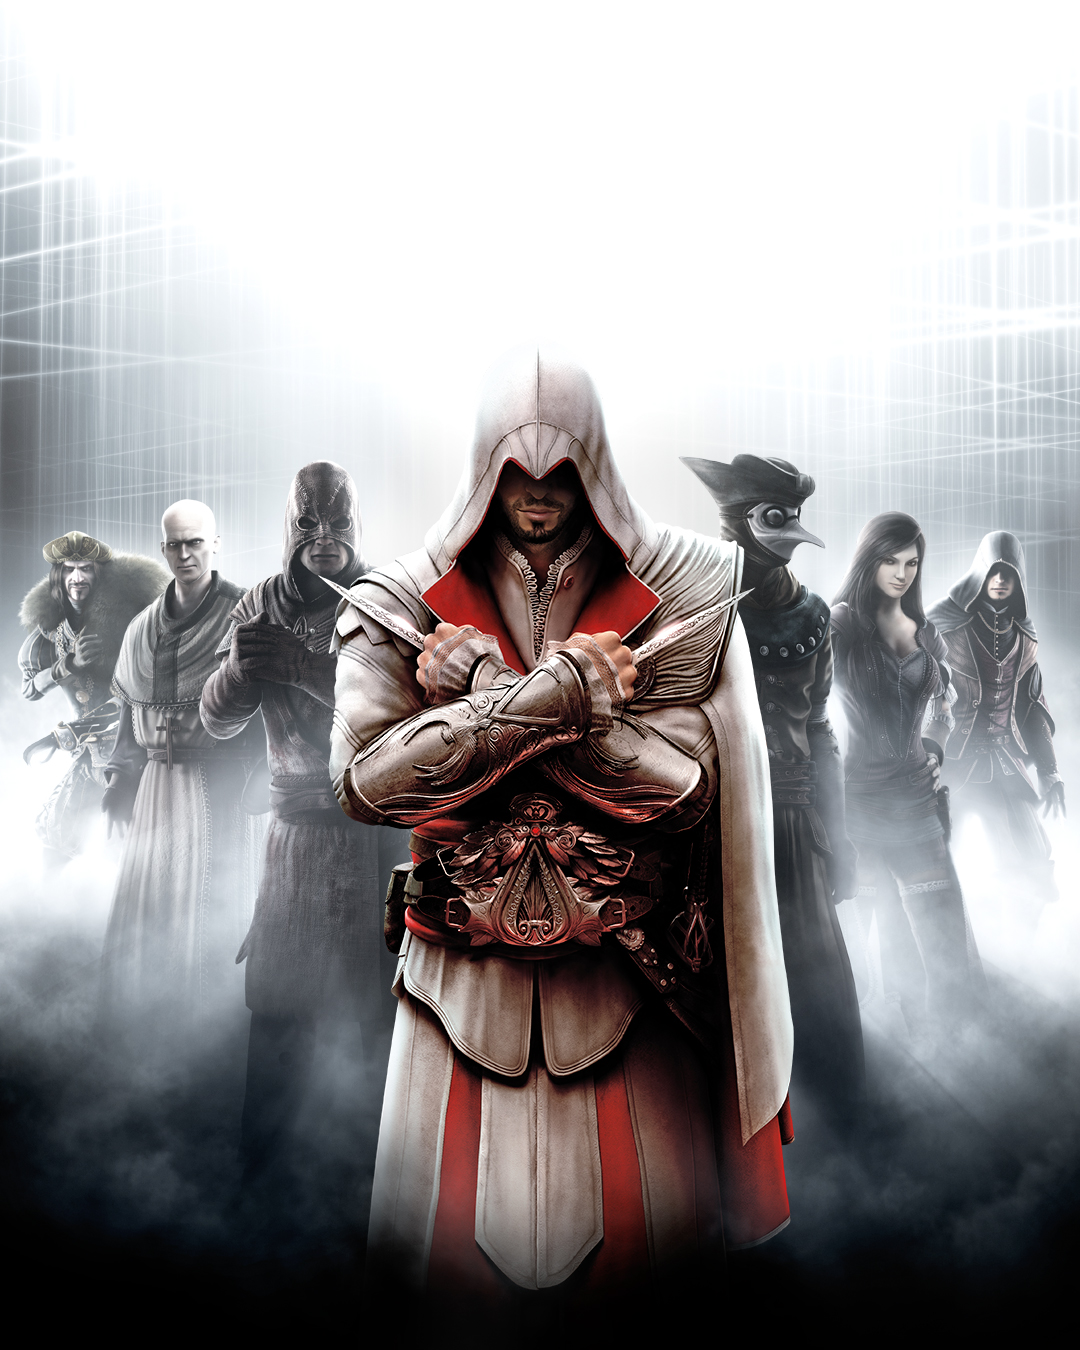 Assassin's Creed 3 Preview: Everything is Permitted